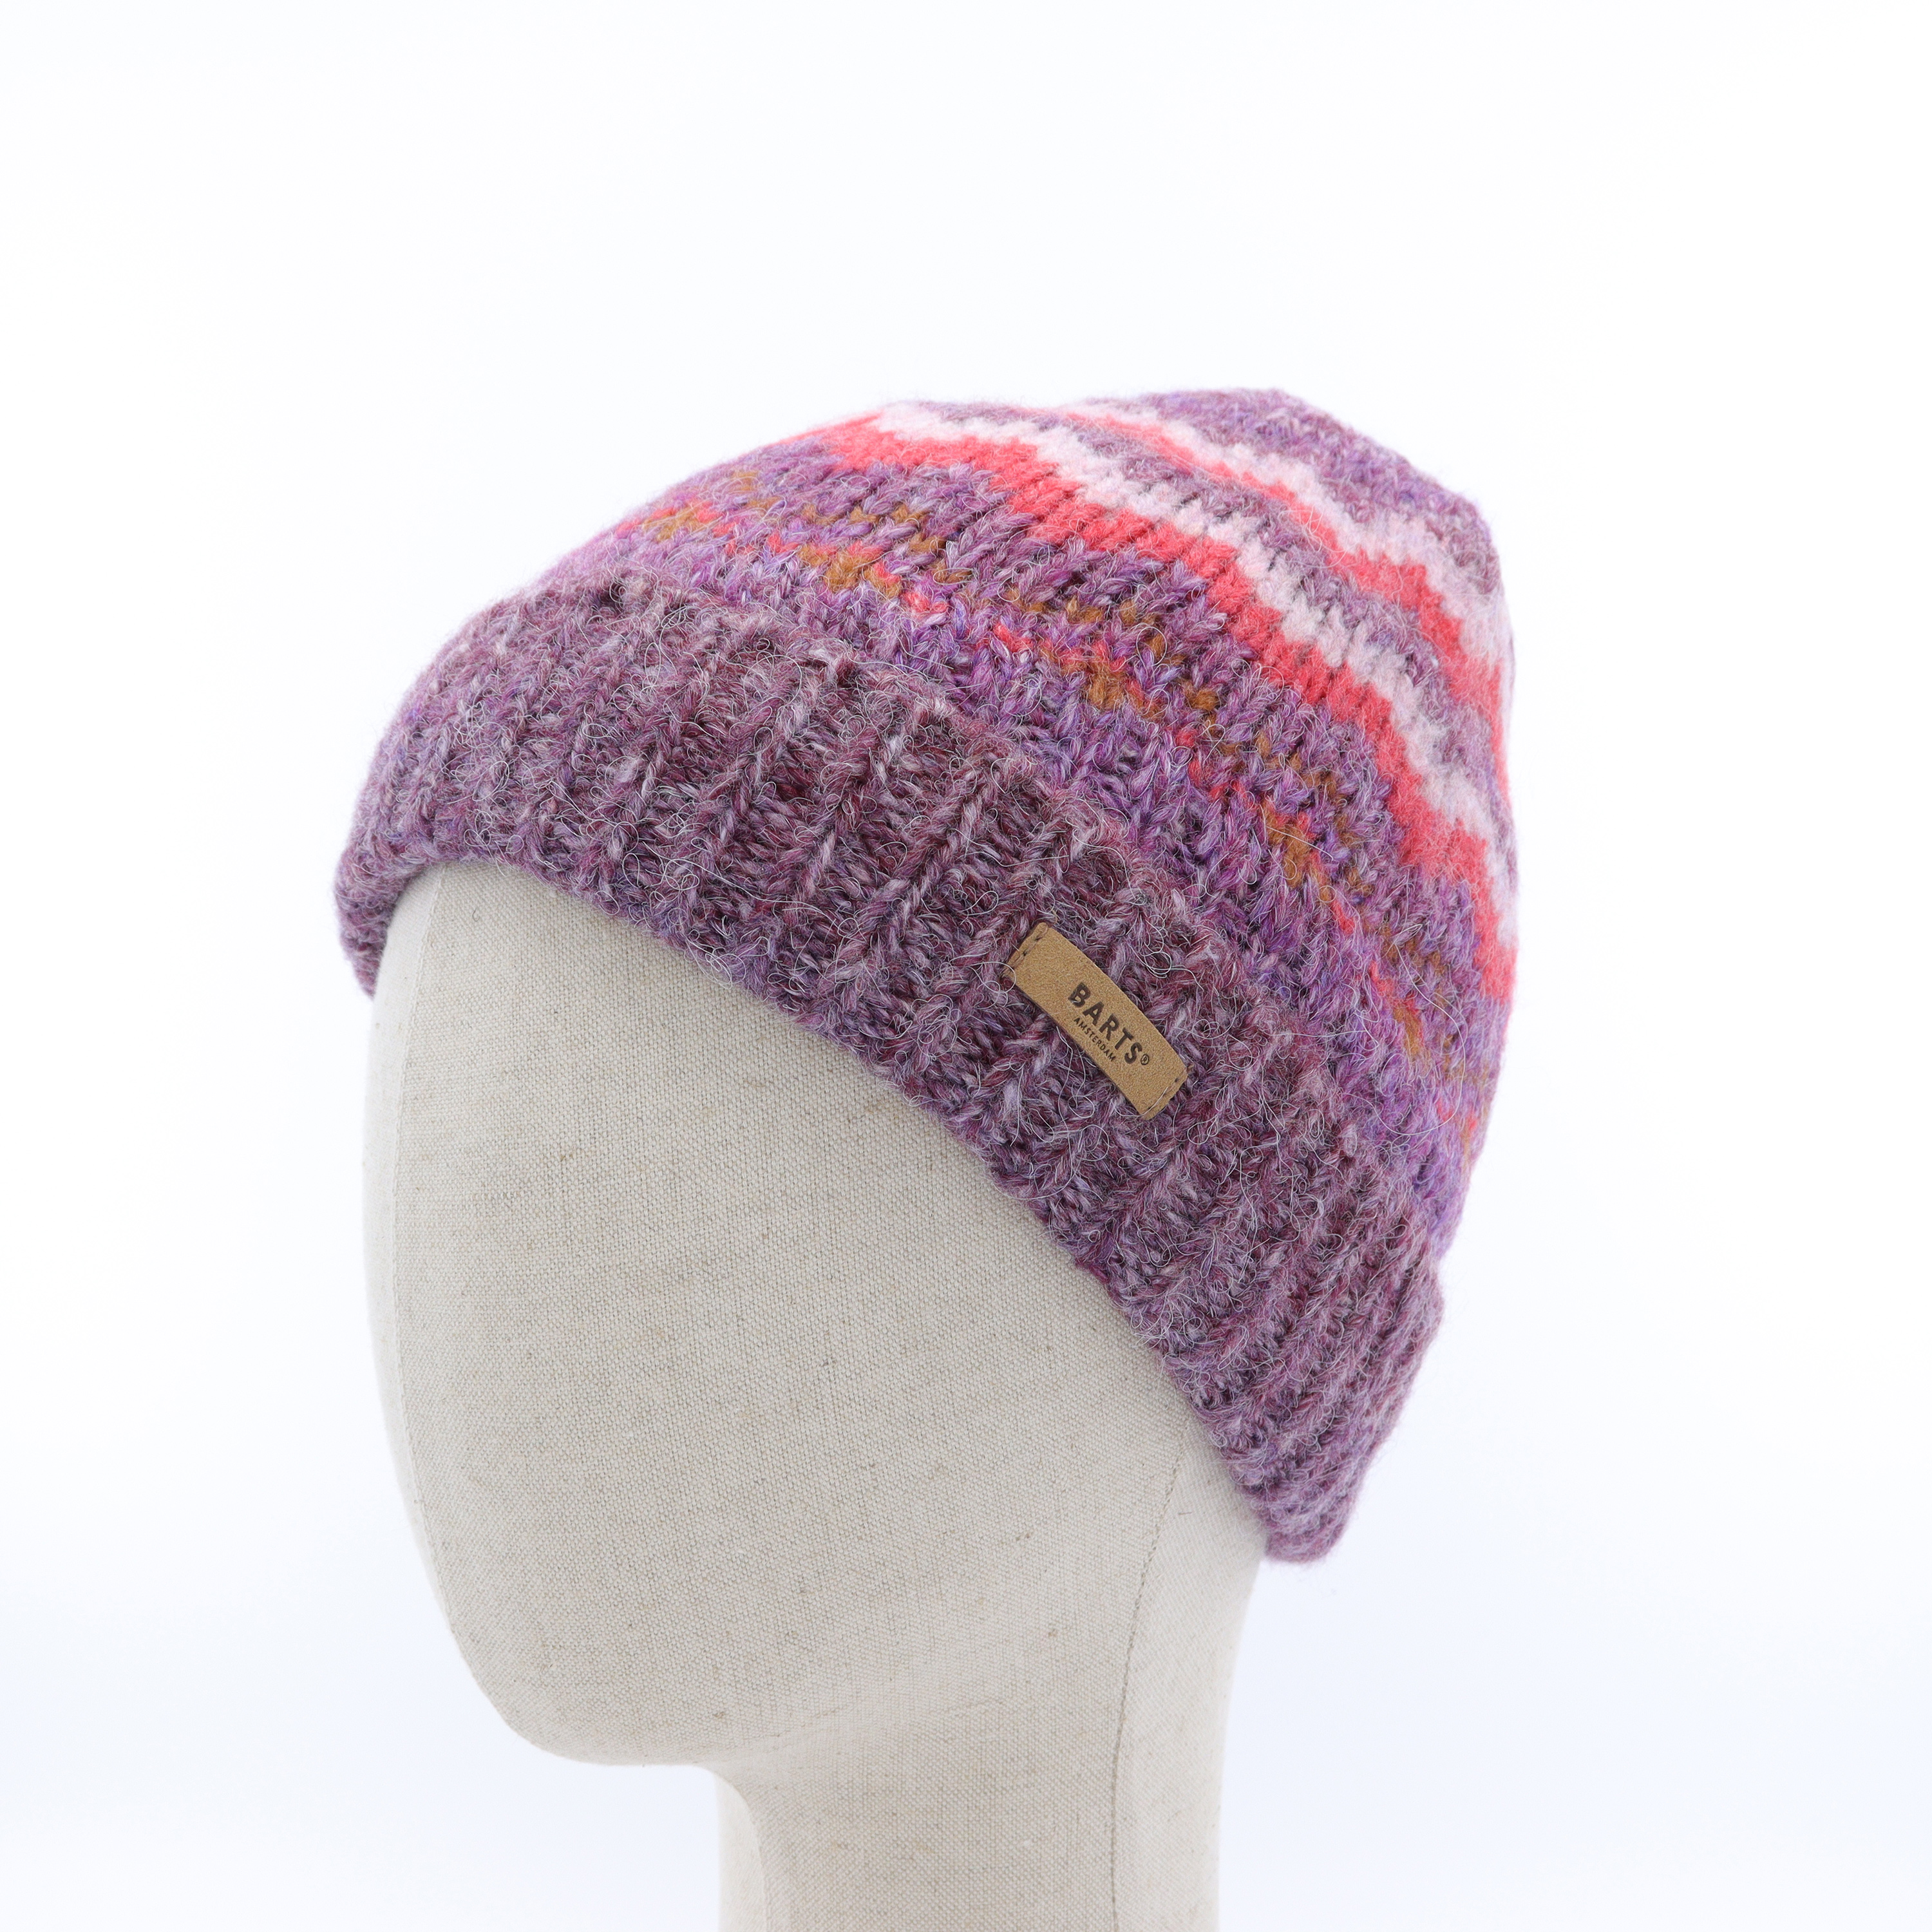 Pink Beanies Shipped Cornwall | - BeanieShop Stock, from UK